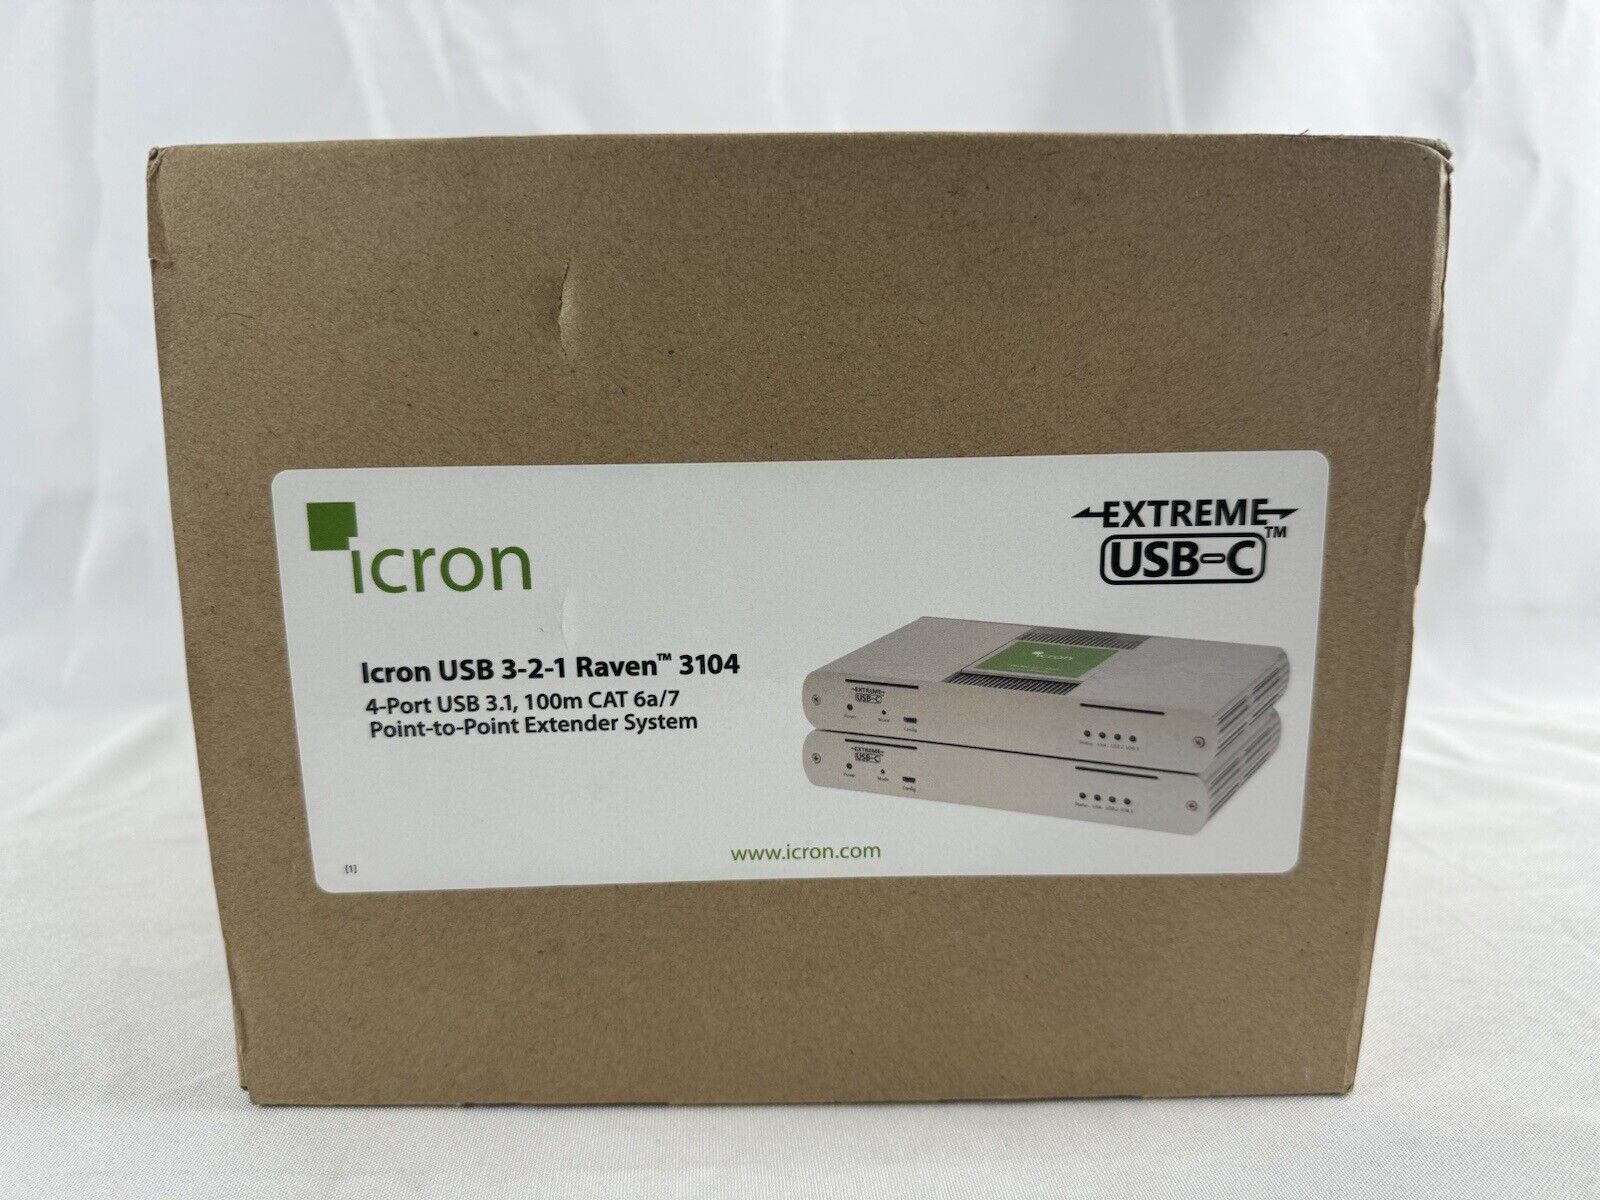 NEW Icron Raven 3104 USB 3-2-1 (4-Port USB 3.1 Point to Point Extender System)